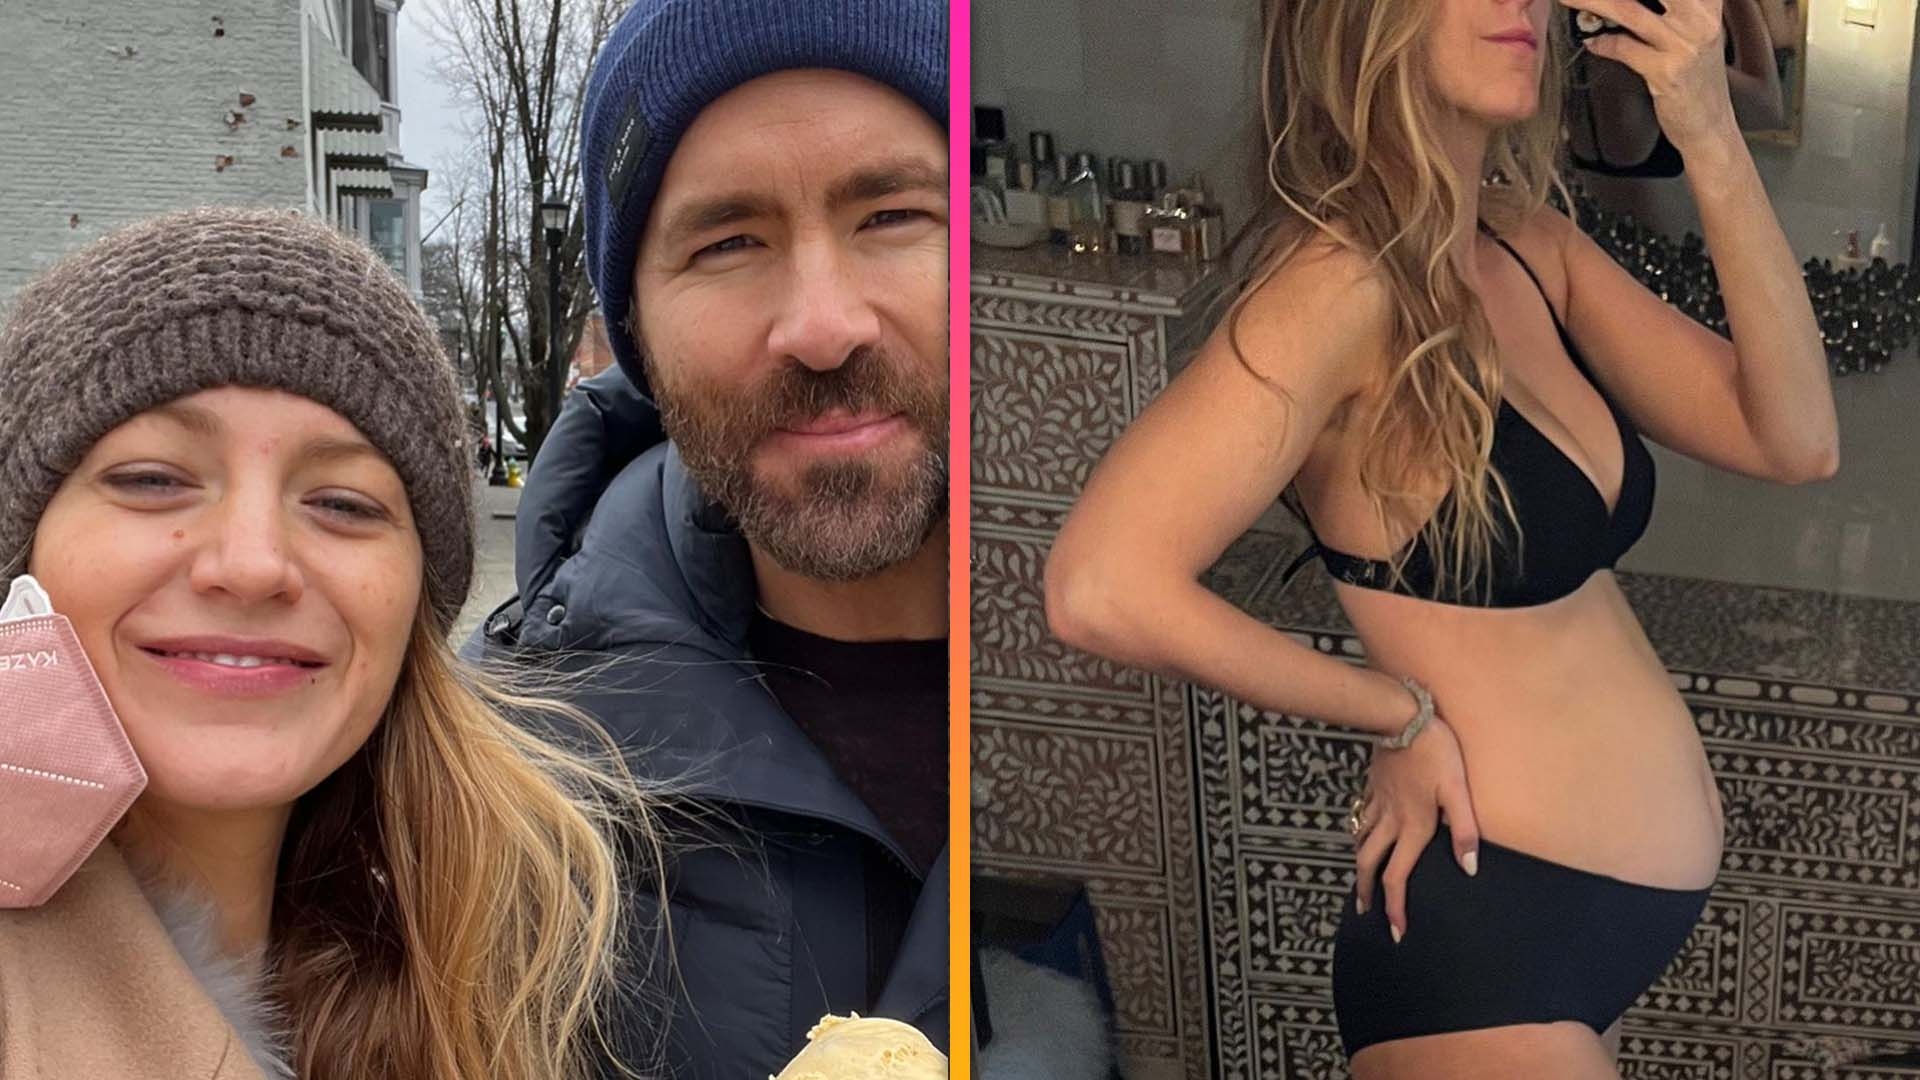 Blake Lively, Ryan Reynolds Are 'Thrilled' With 4th Child's